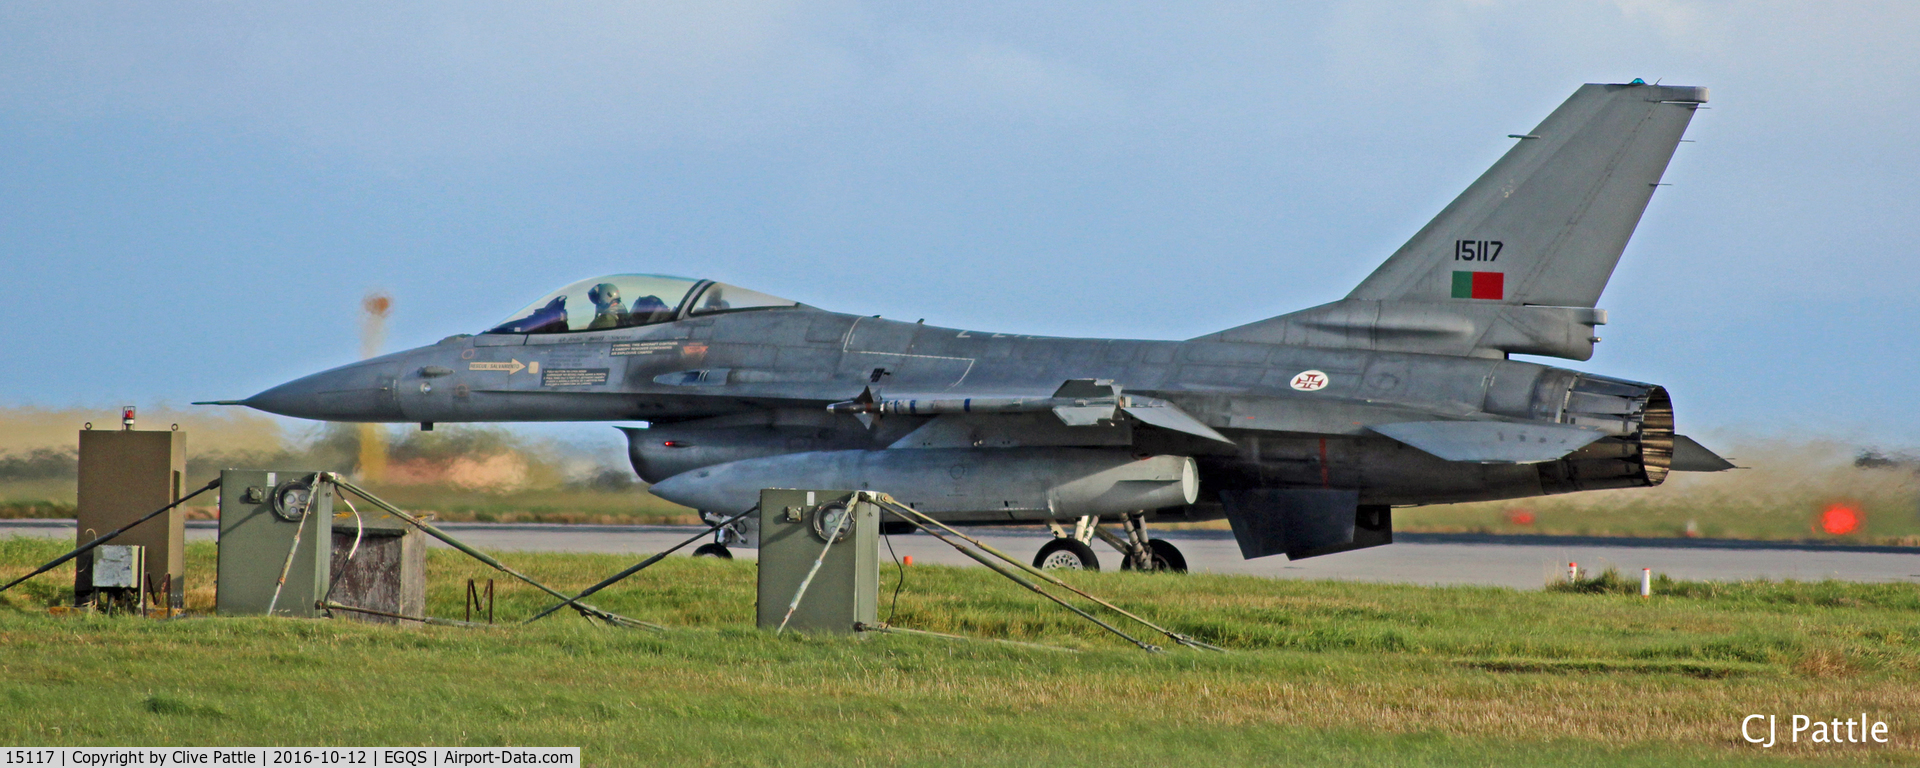 15117, 1993 Lockheed F-16AM Fighting Falcon C/N AA-16, In action at RAF Lossiemouth EGQS during Exercise Joint Warrior 16-2